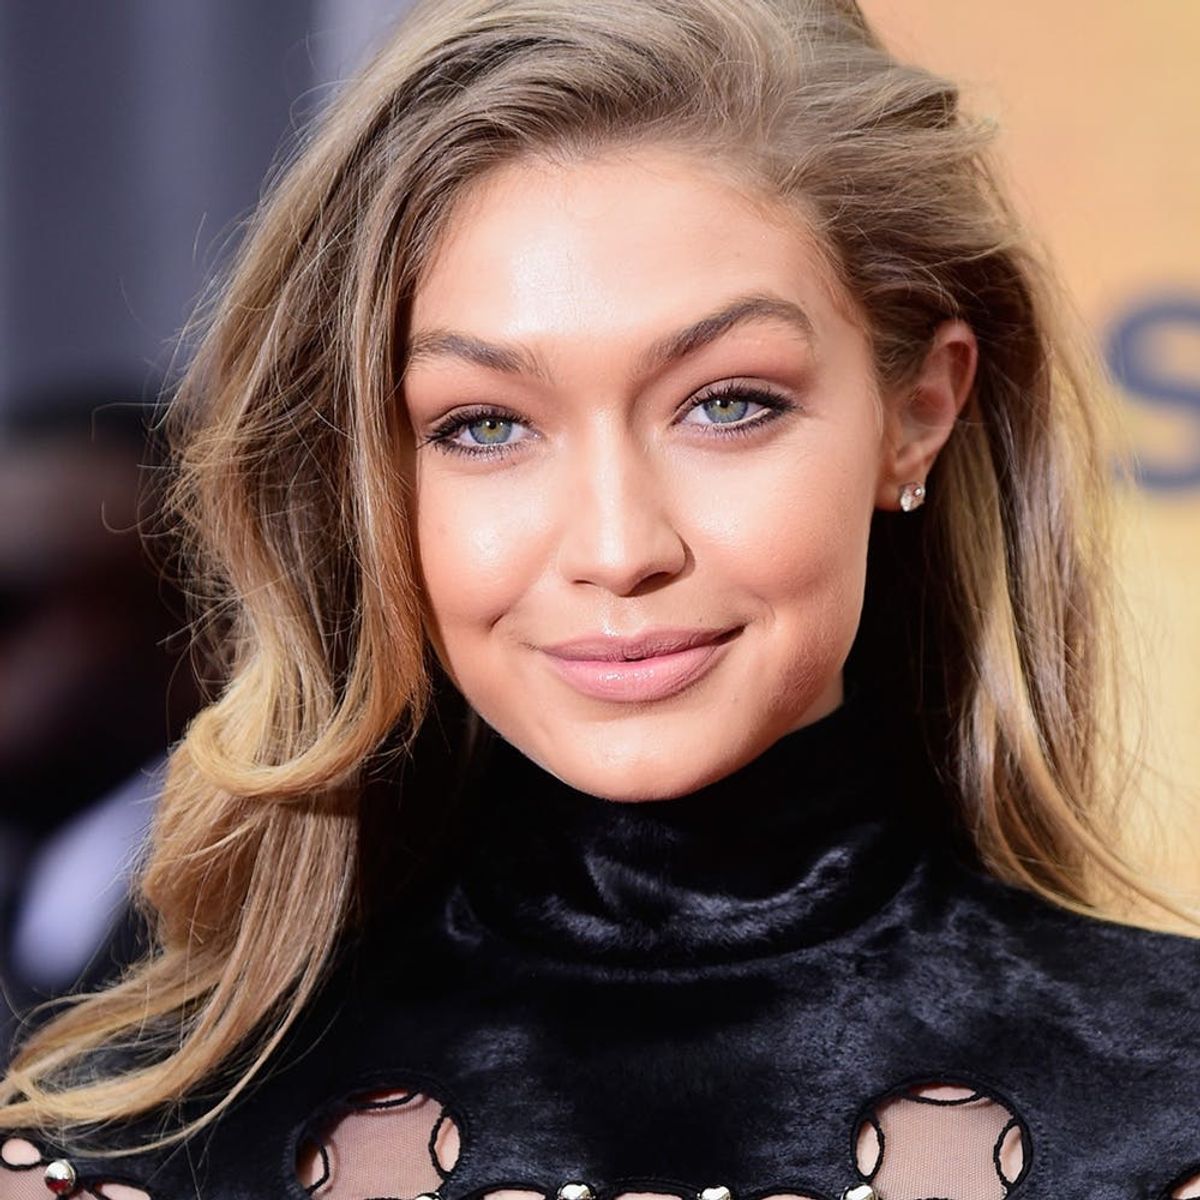 Gigi Hadid May Be the Latest Celeb to Get a Perm